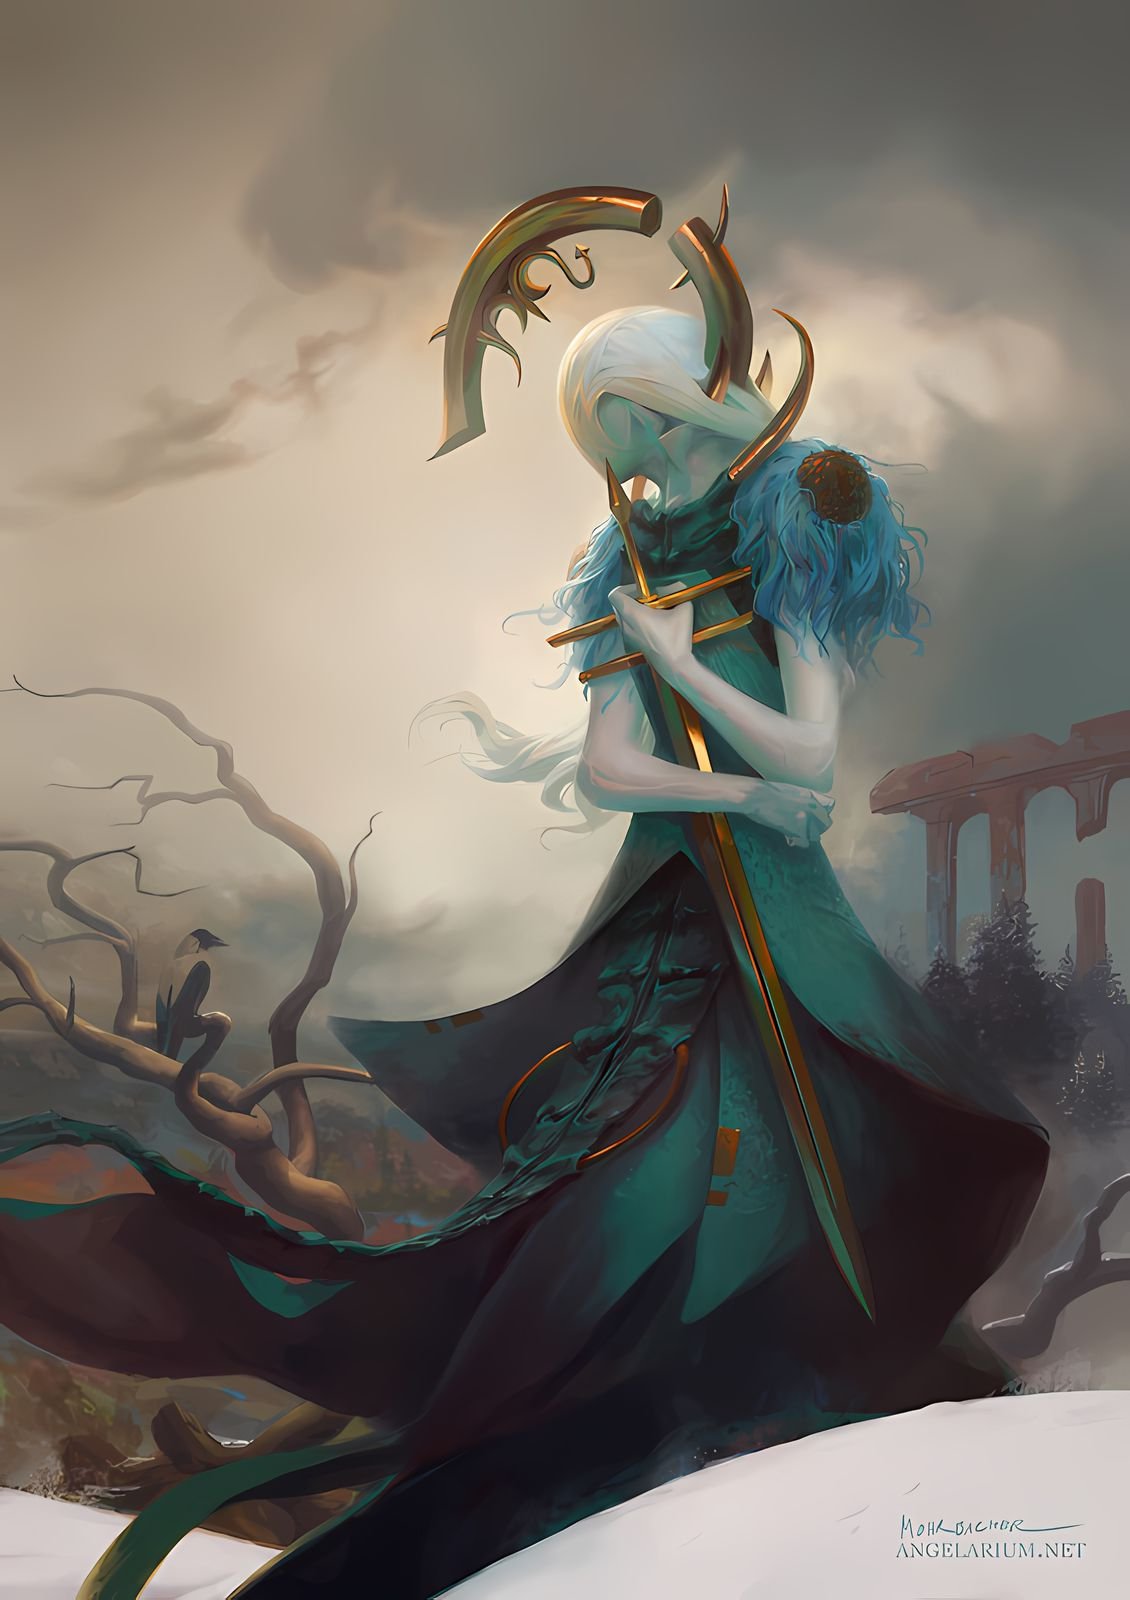 Peter Mohrbacher Blends Surrealism With Fantasy To Create Powerful Magical Beings (13)